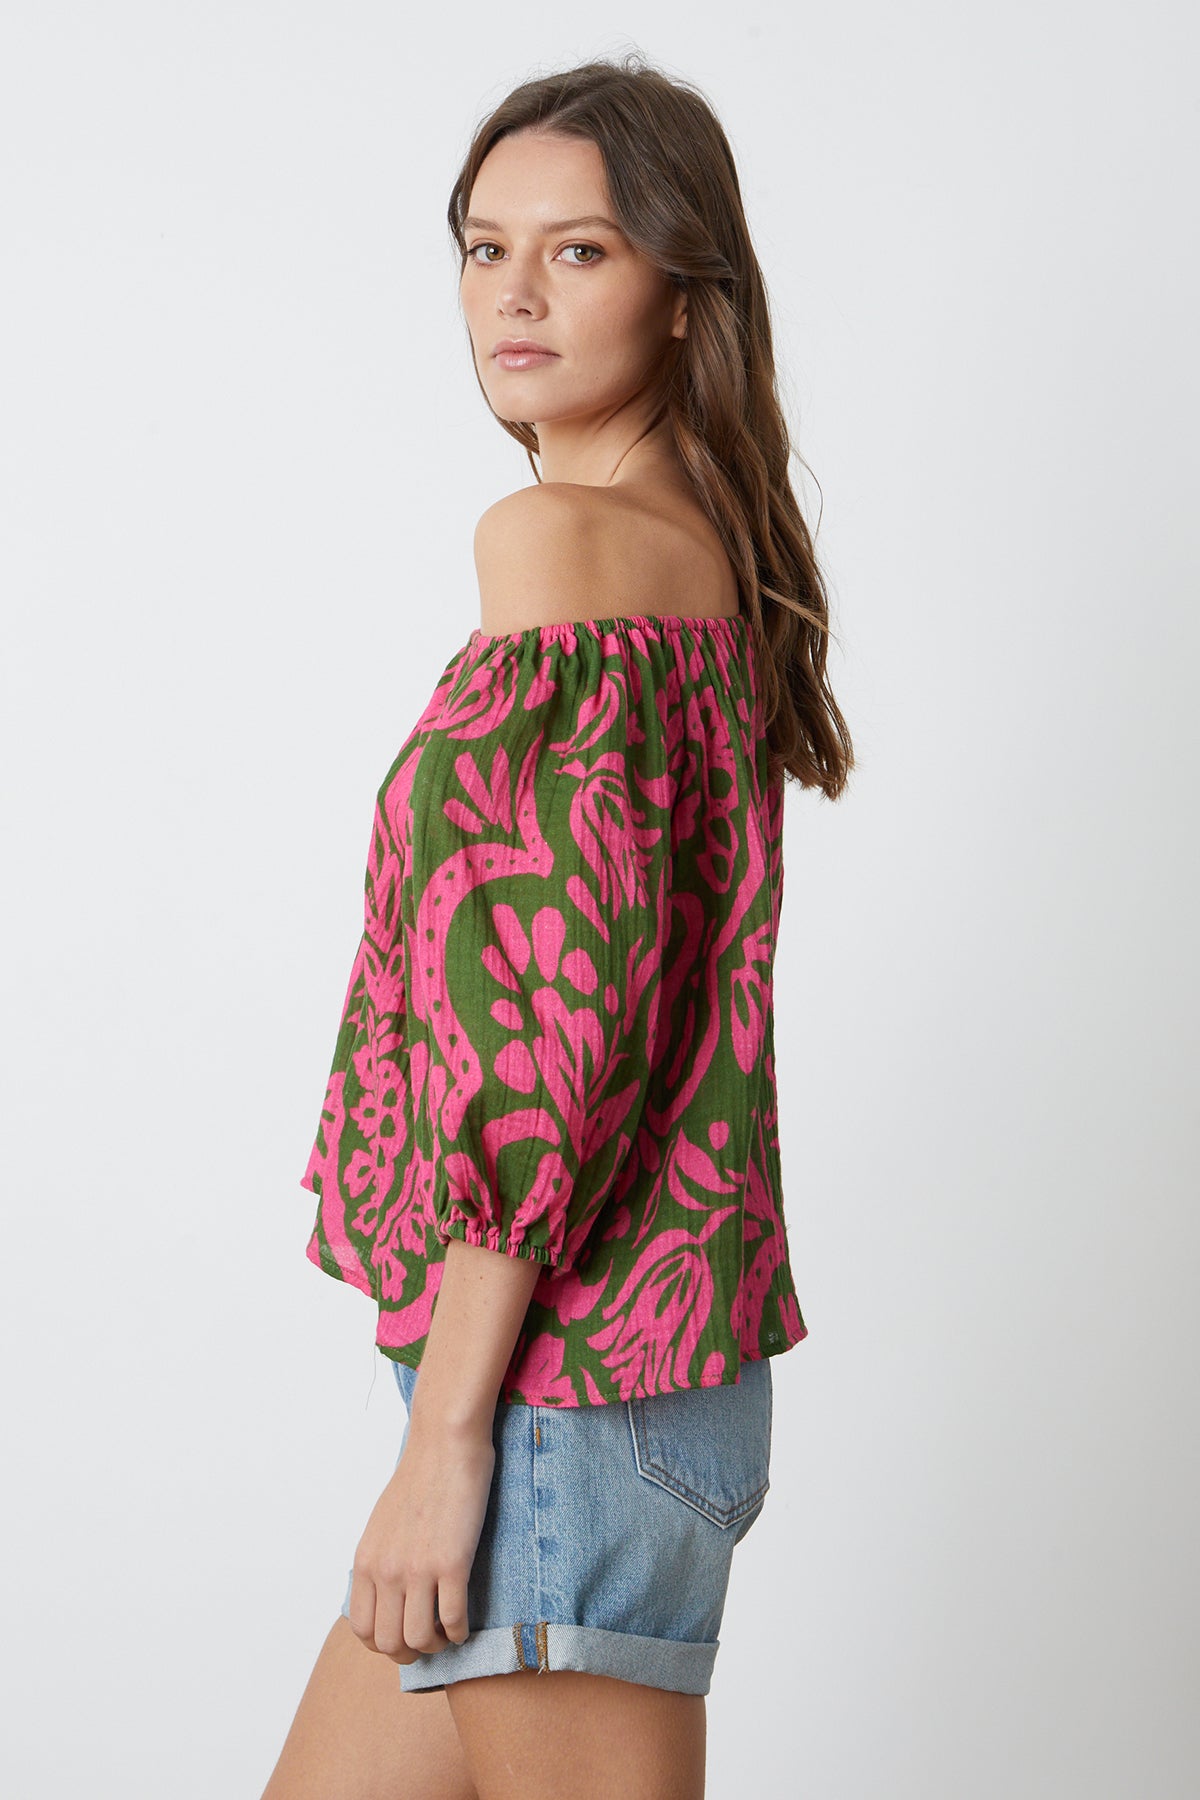 The model is wearing a pink and green off the shoulder CANDICE PRINTED COTTON GAUZE TOP by Velvet by Graham & Spencer with denim shorts, side view.-26577386668225